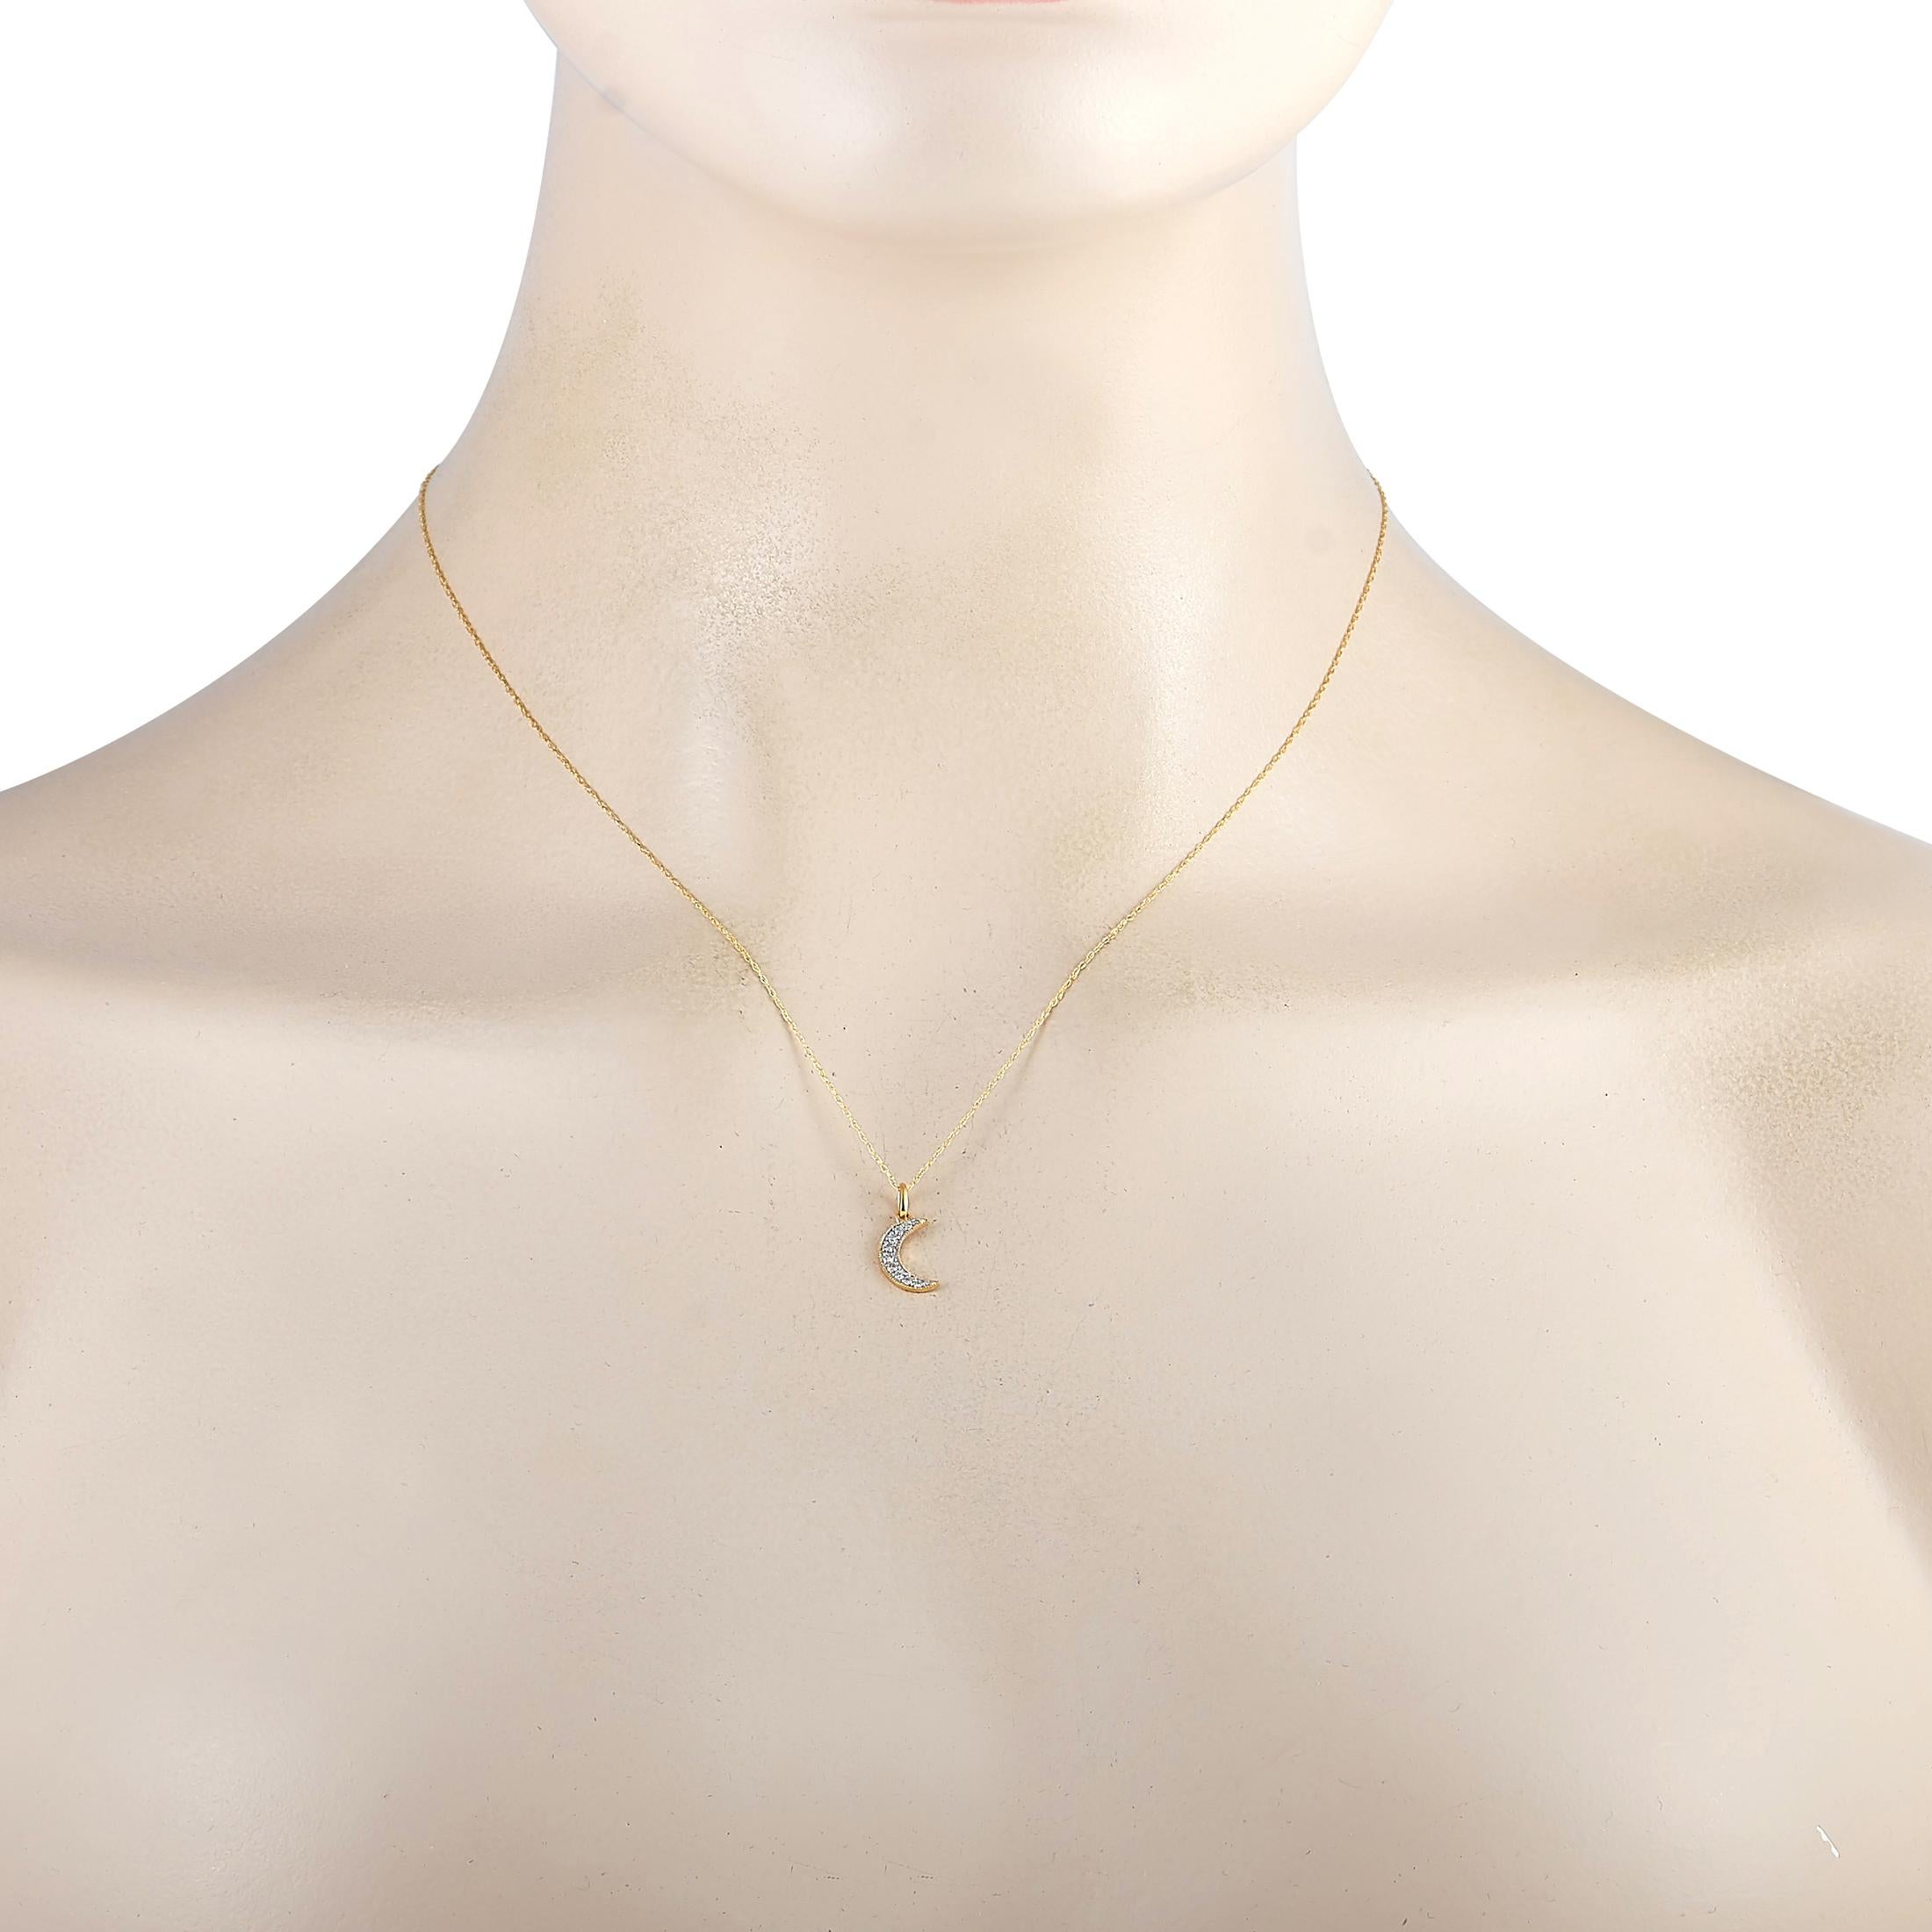 This LB Exclusive necklace is made of 14K yellow gold and embellished with diamonds that amount to 0.10 carats. The necklace weighs 0.8 grams and is presented with a 17.50” chain and a moon pendant that measures 0.50” in length and 0.25” in